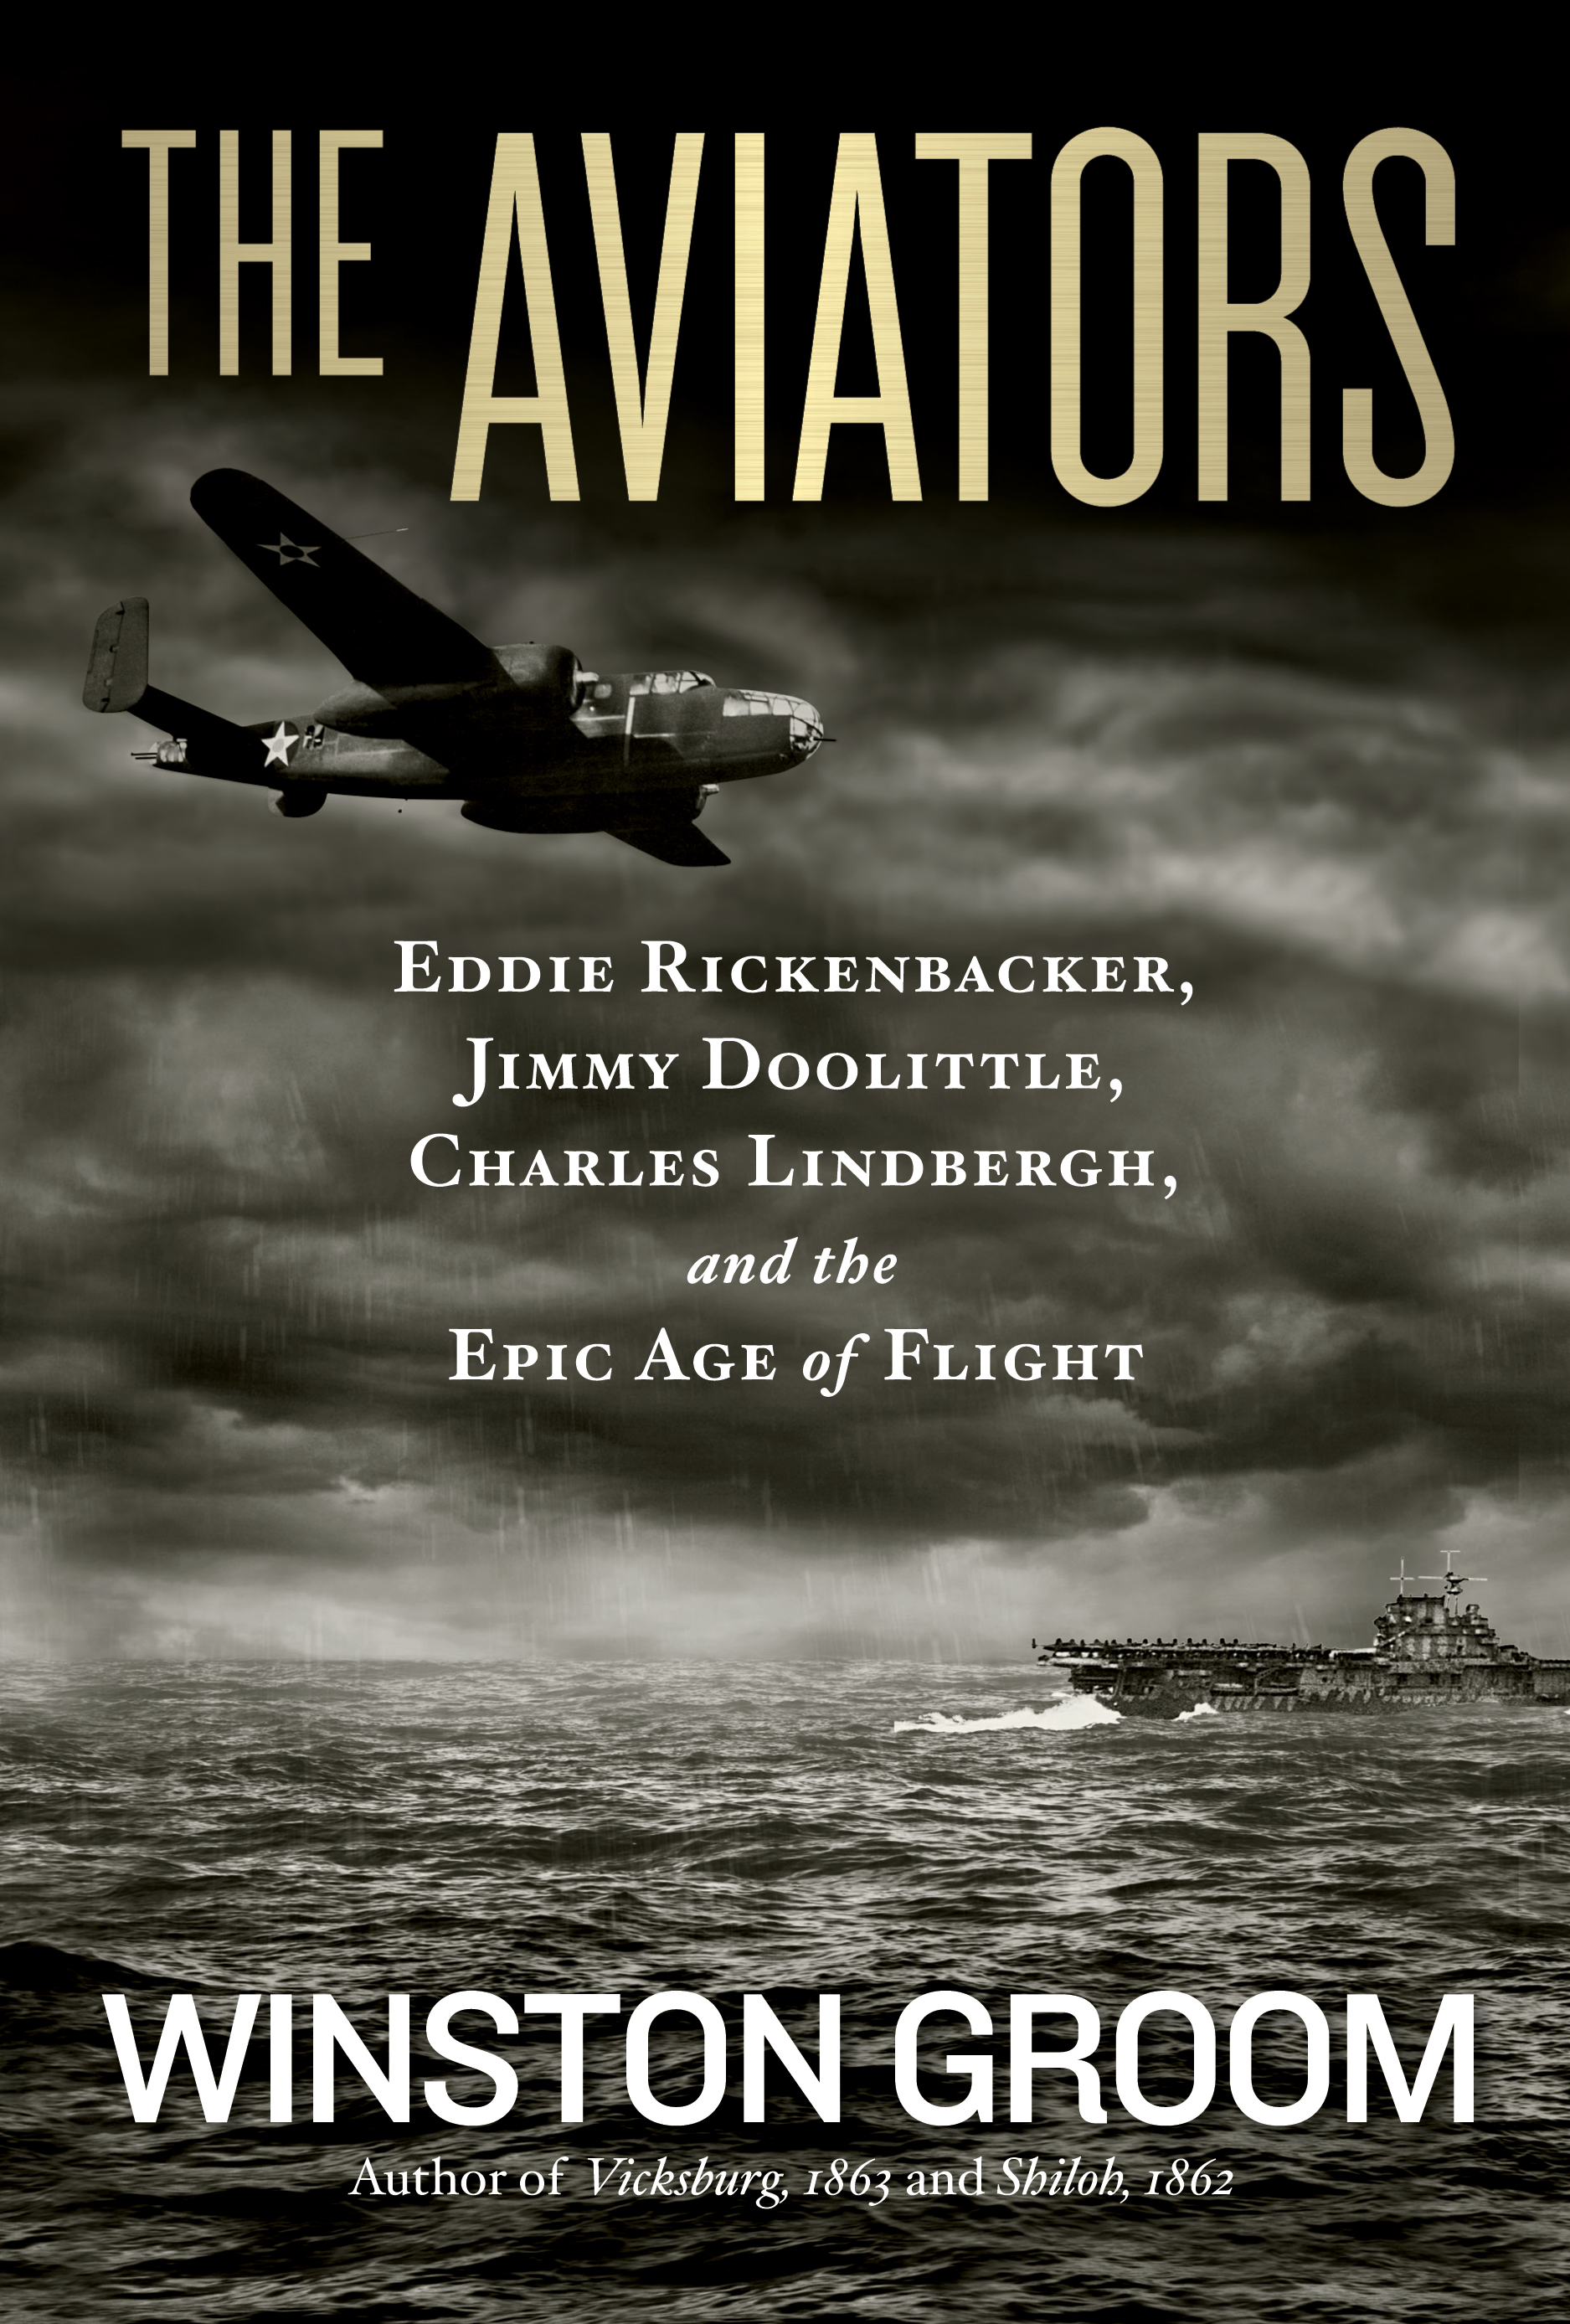 The aviators Eddie Rickenbacker, Jimmy Doolittle, Charles Lindbergh, and the epic aqge of flight cover image